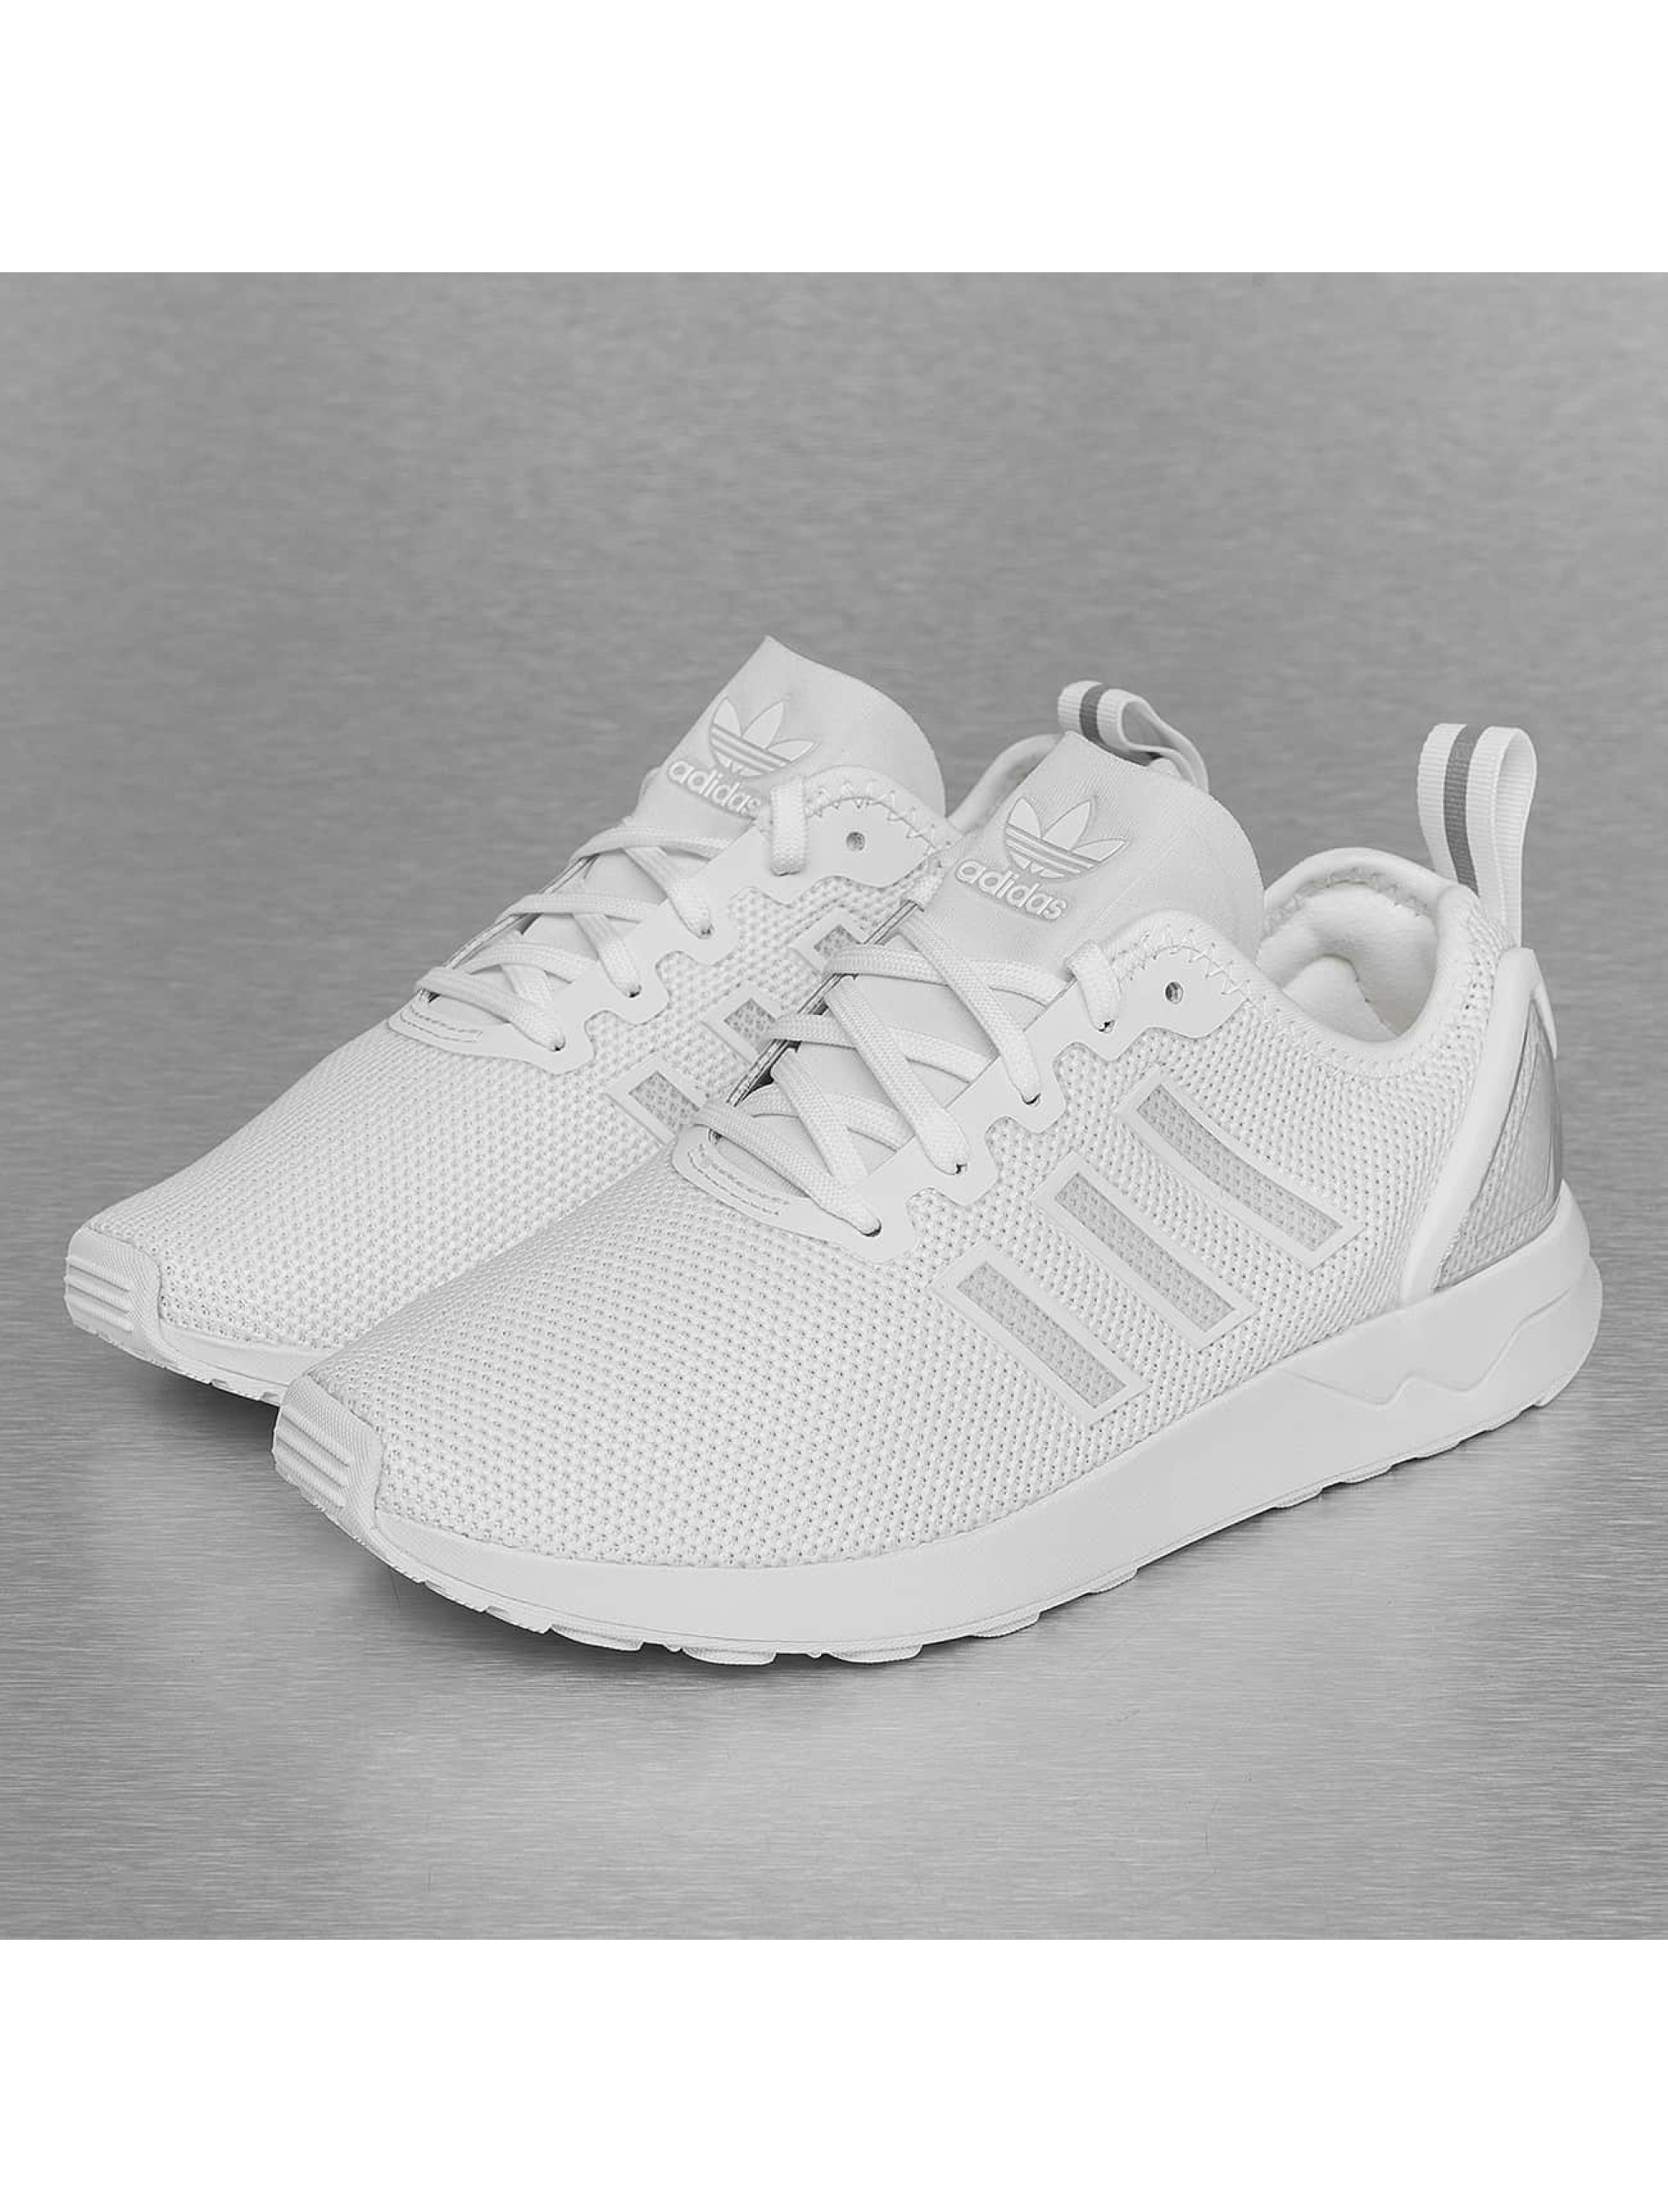 Adidas Weisse Schuhe Shop Clothing Shoes Online